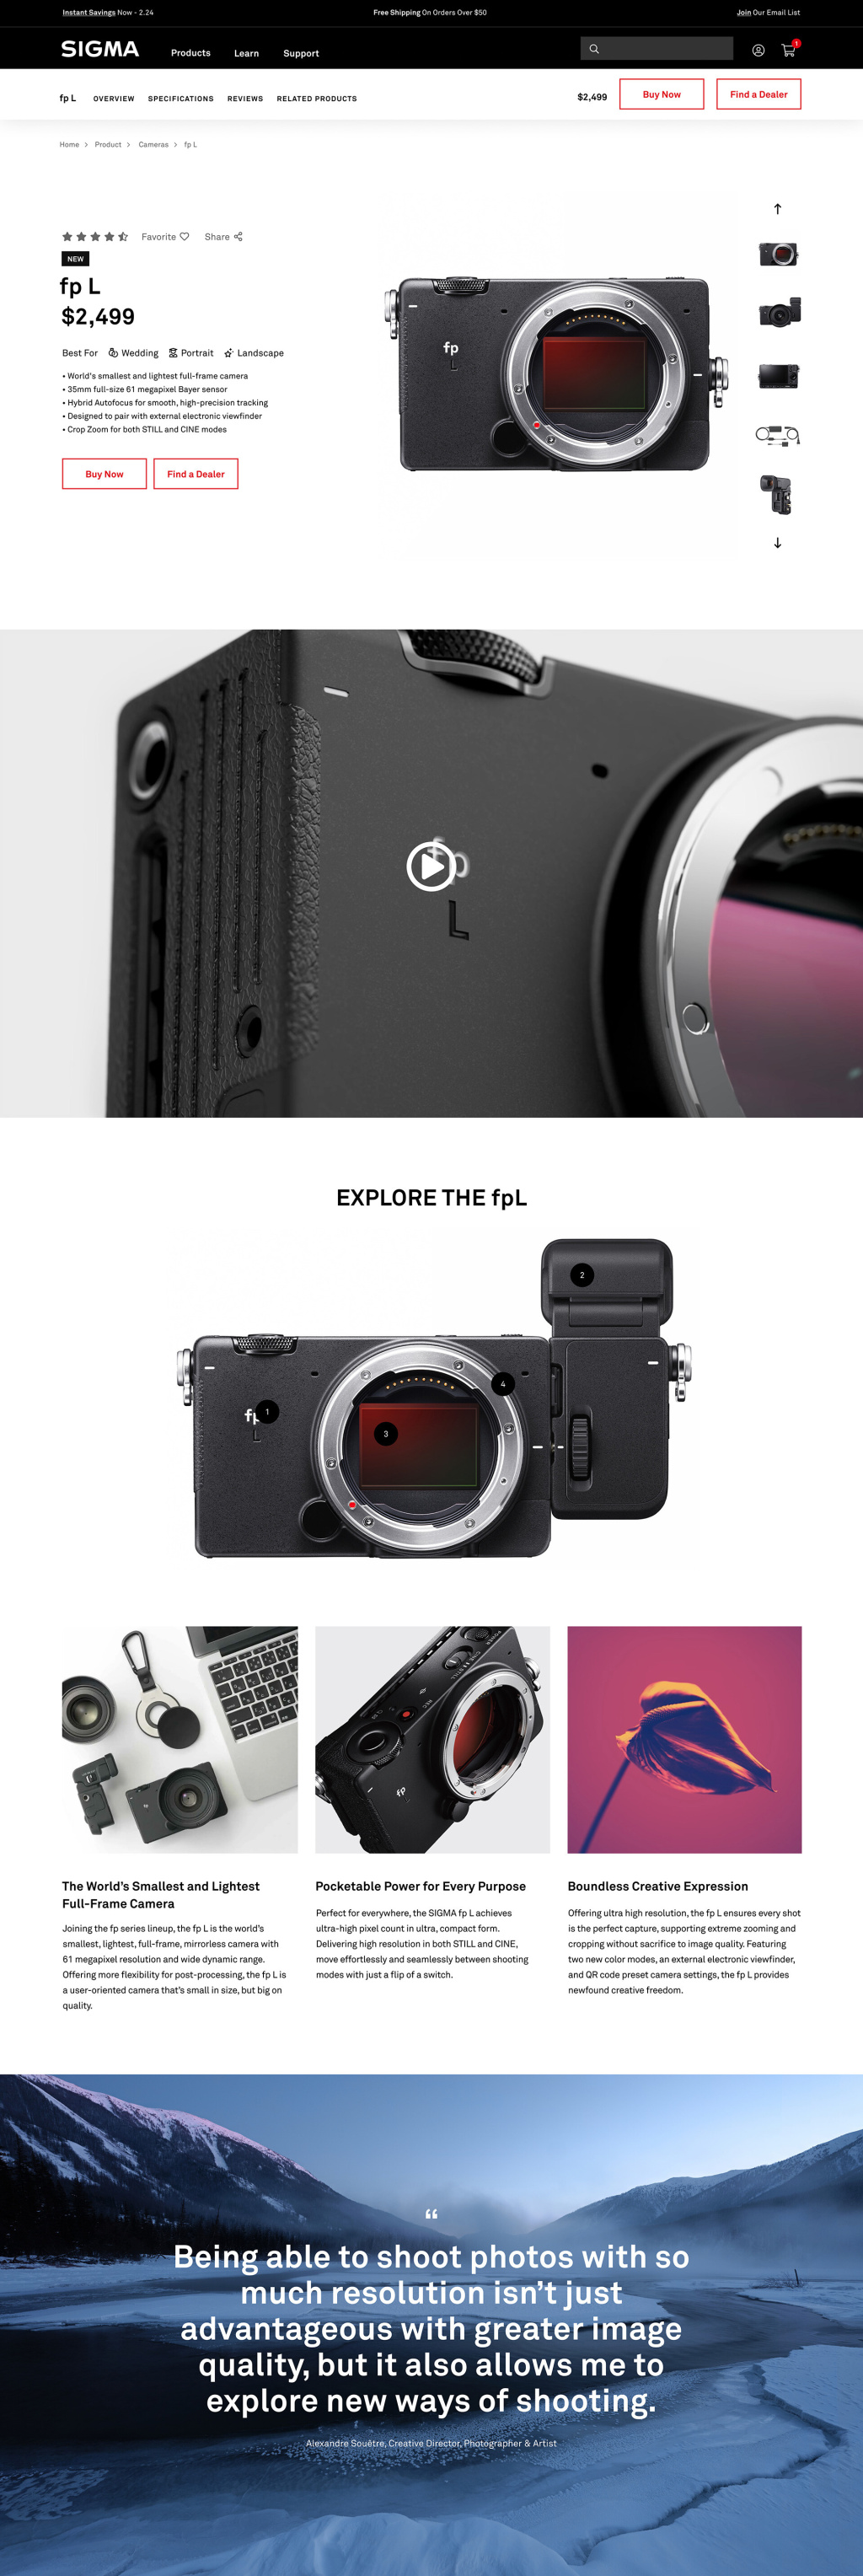 A website design of the Sigma fp L camera product detail page.